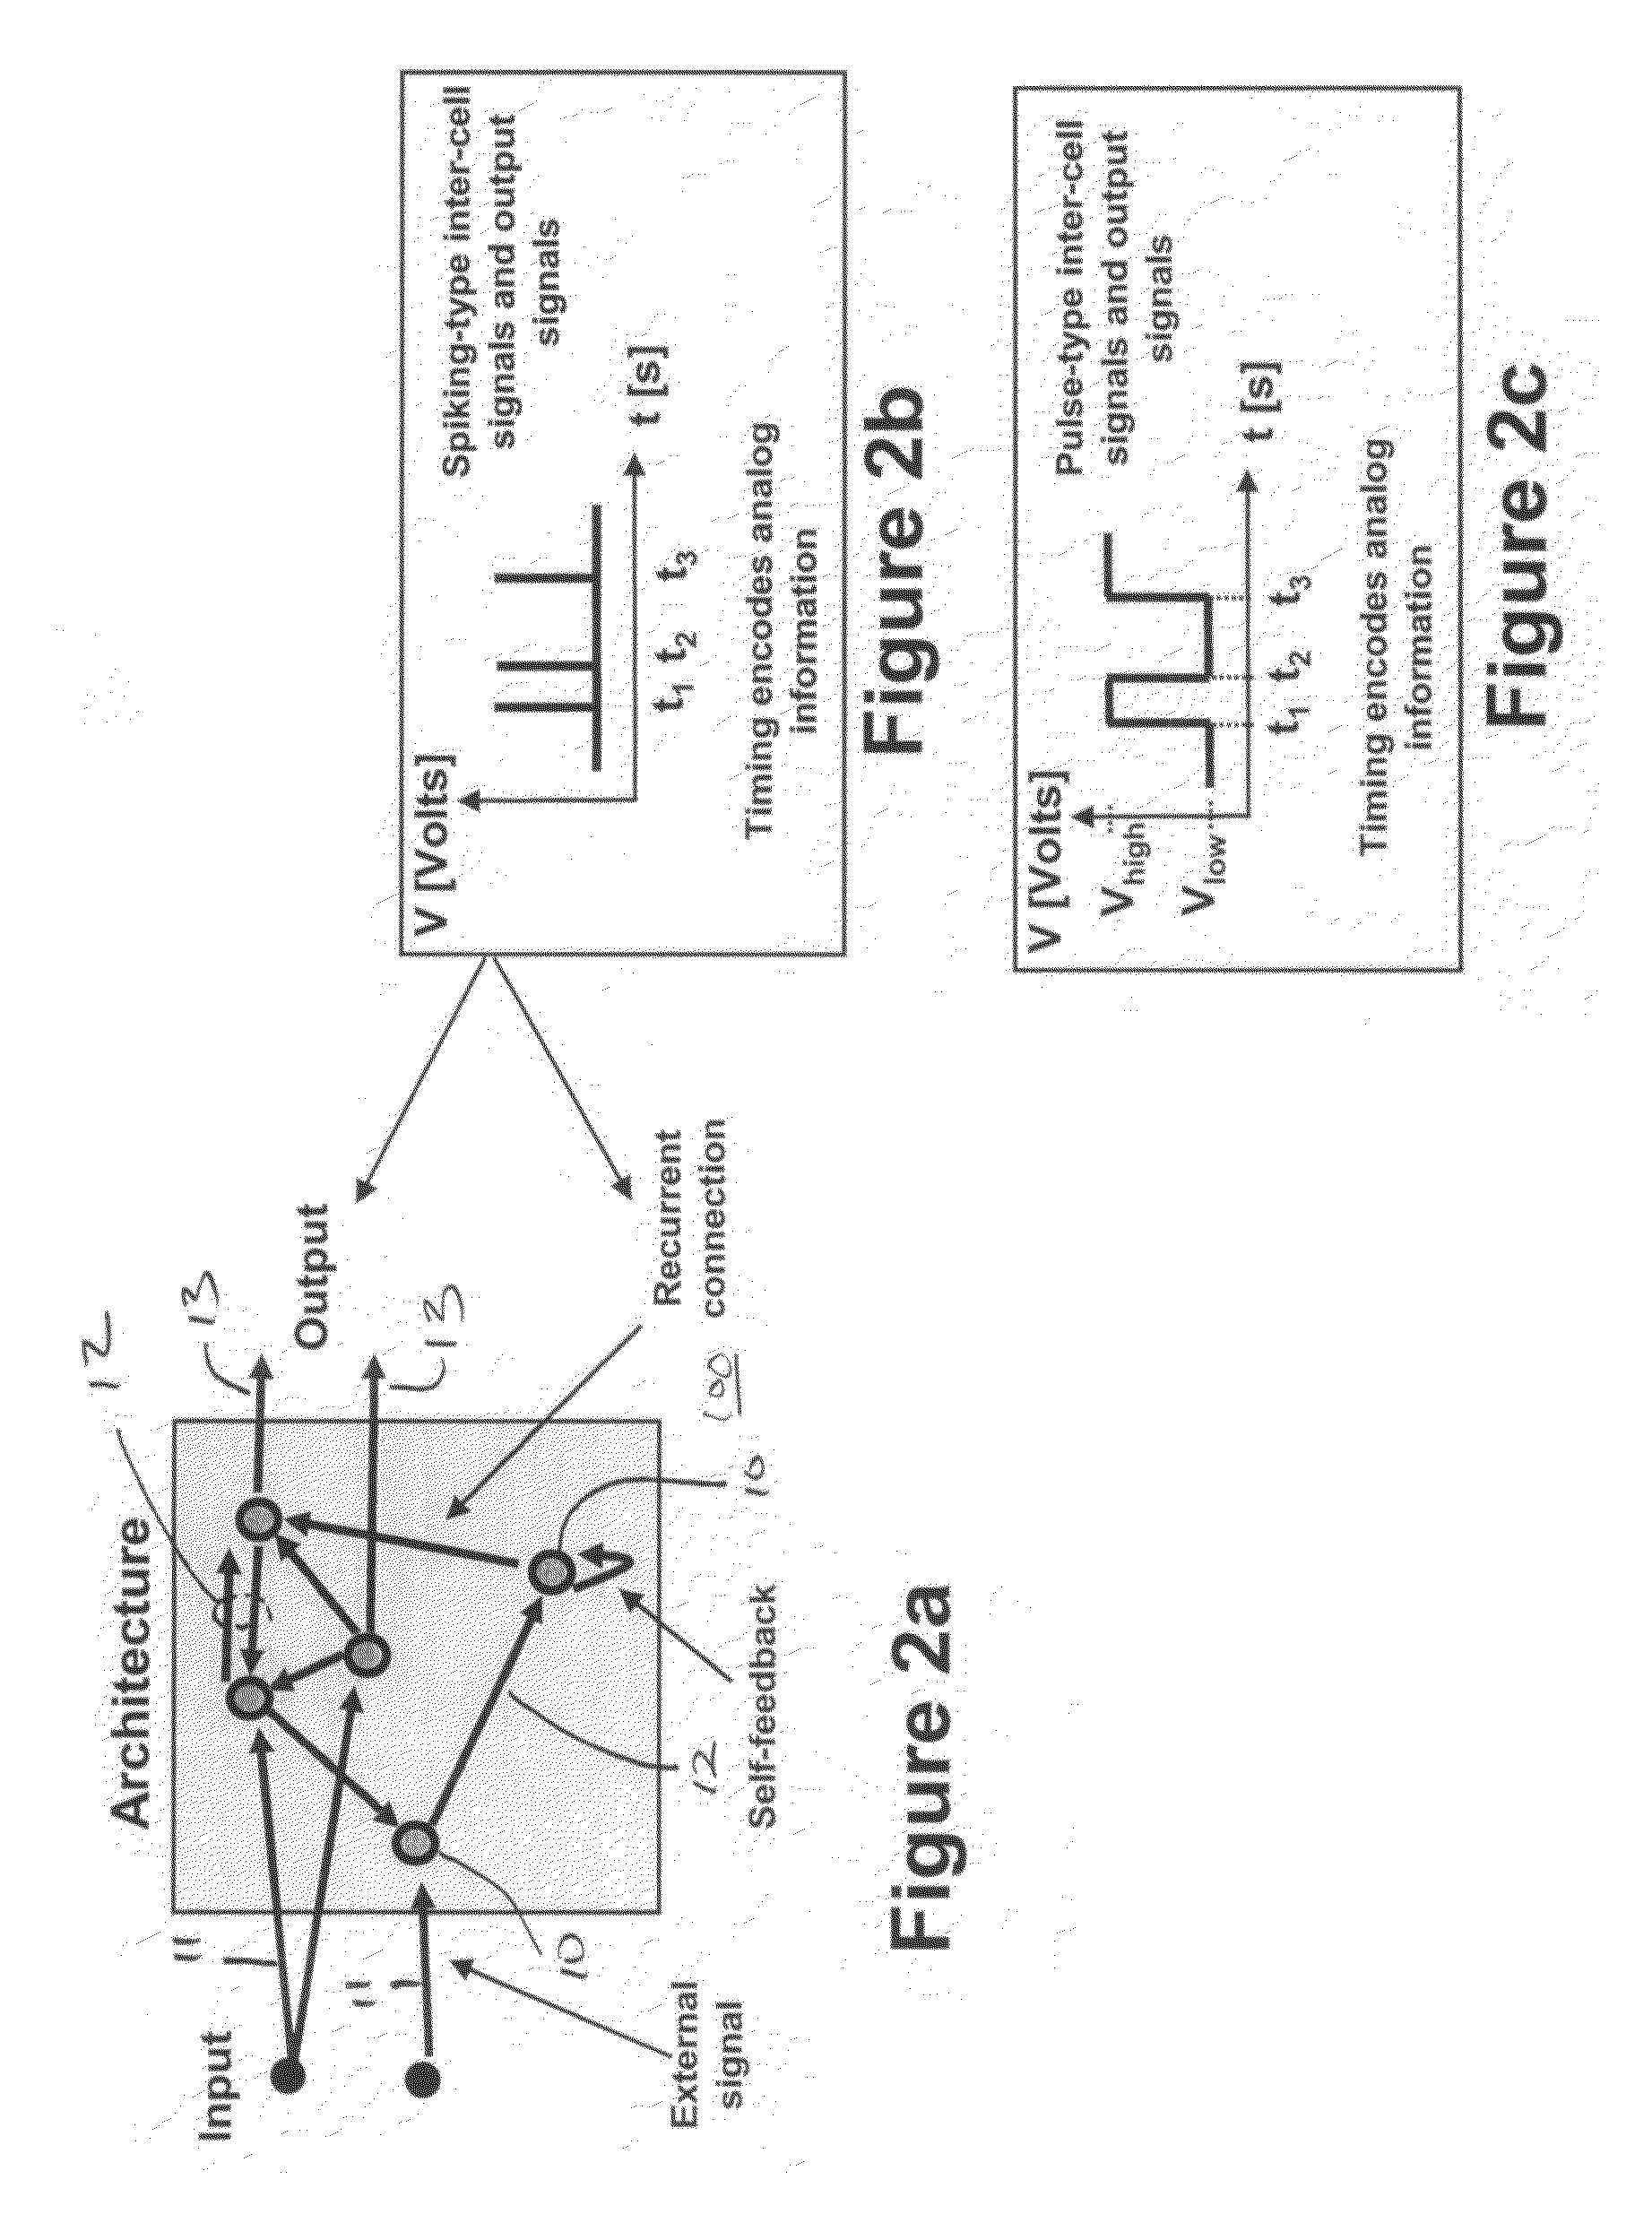 Spike domain and pulse domain non-linear processors